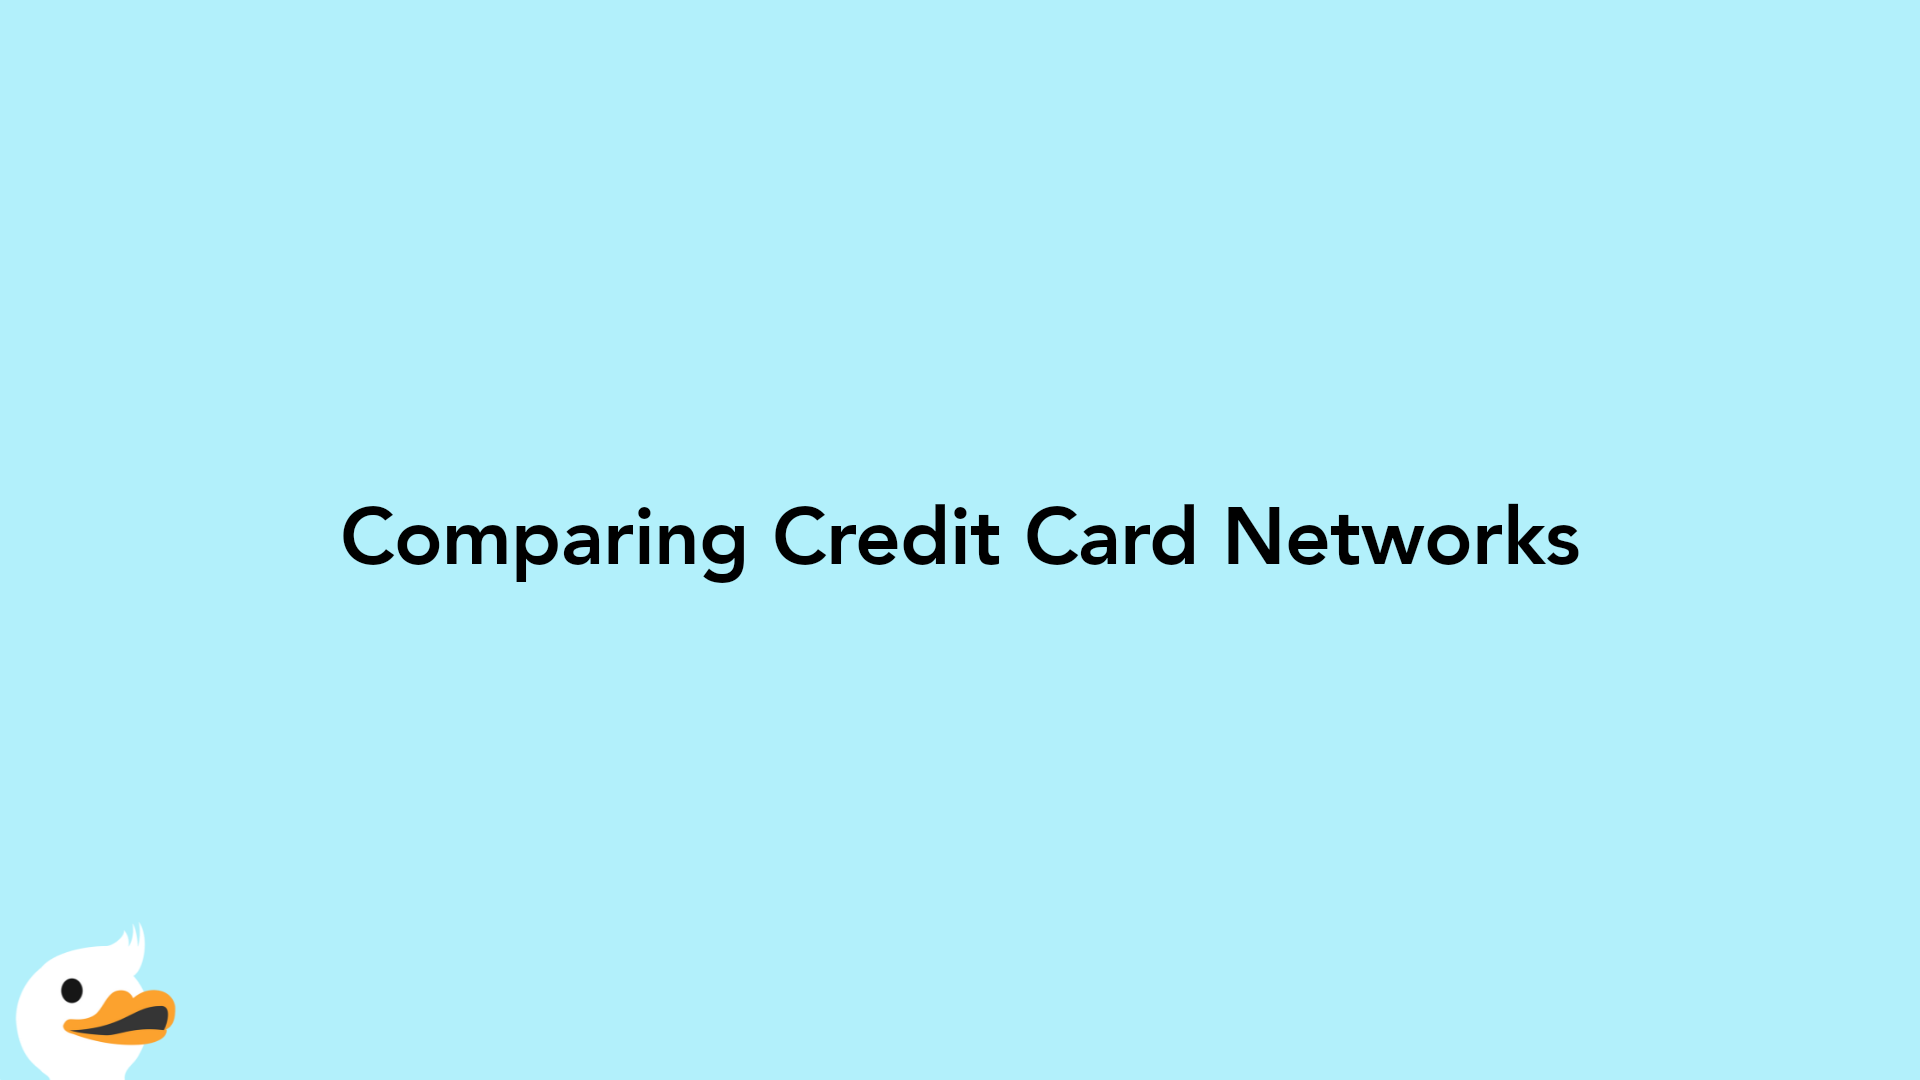 Comparing Credit Card Networks